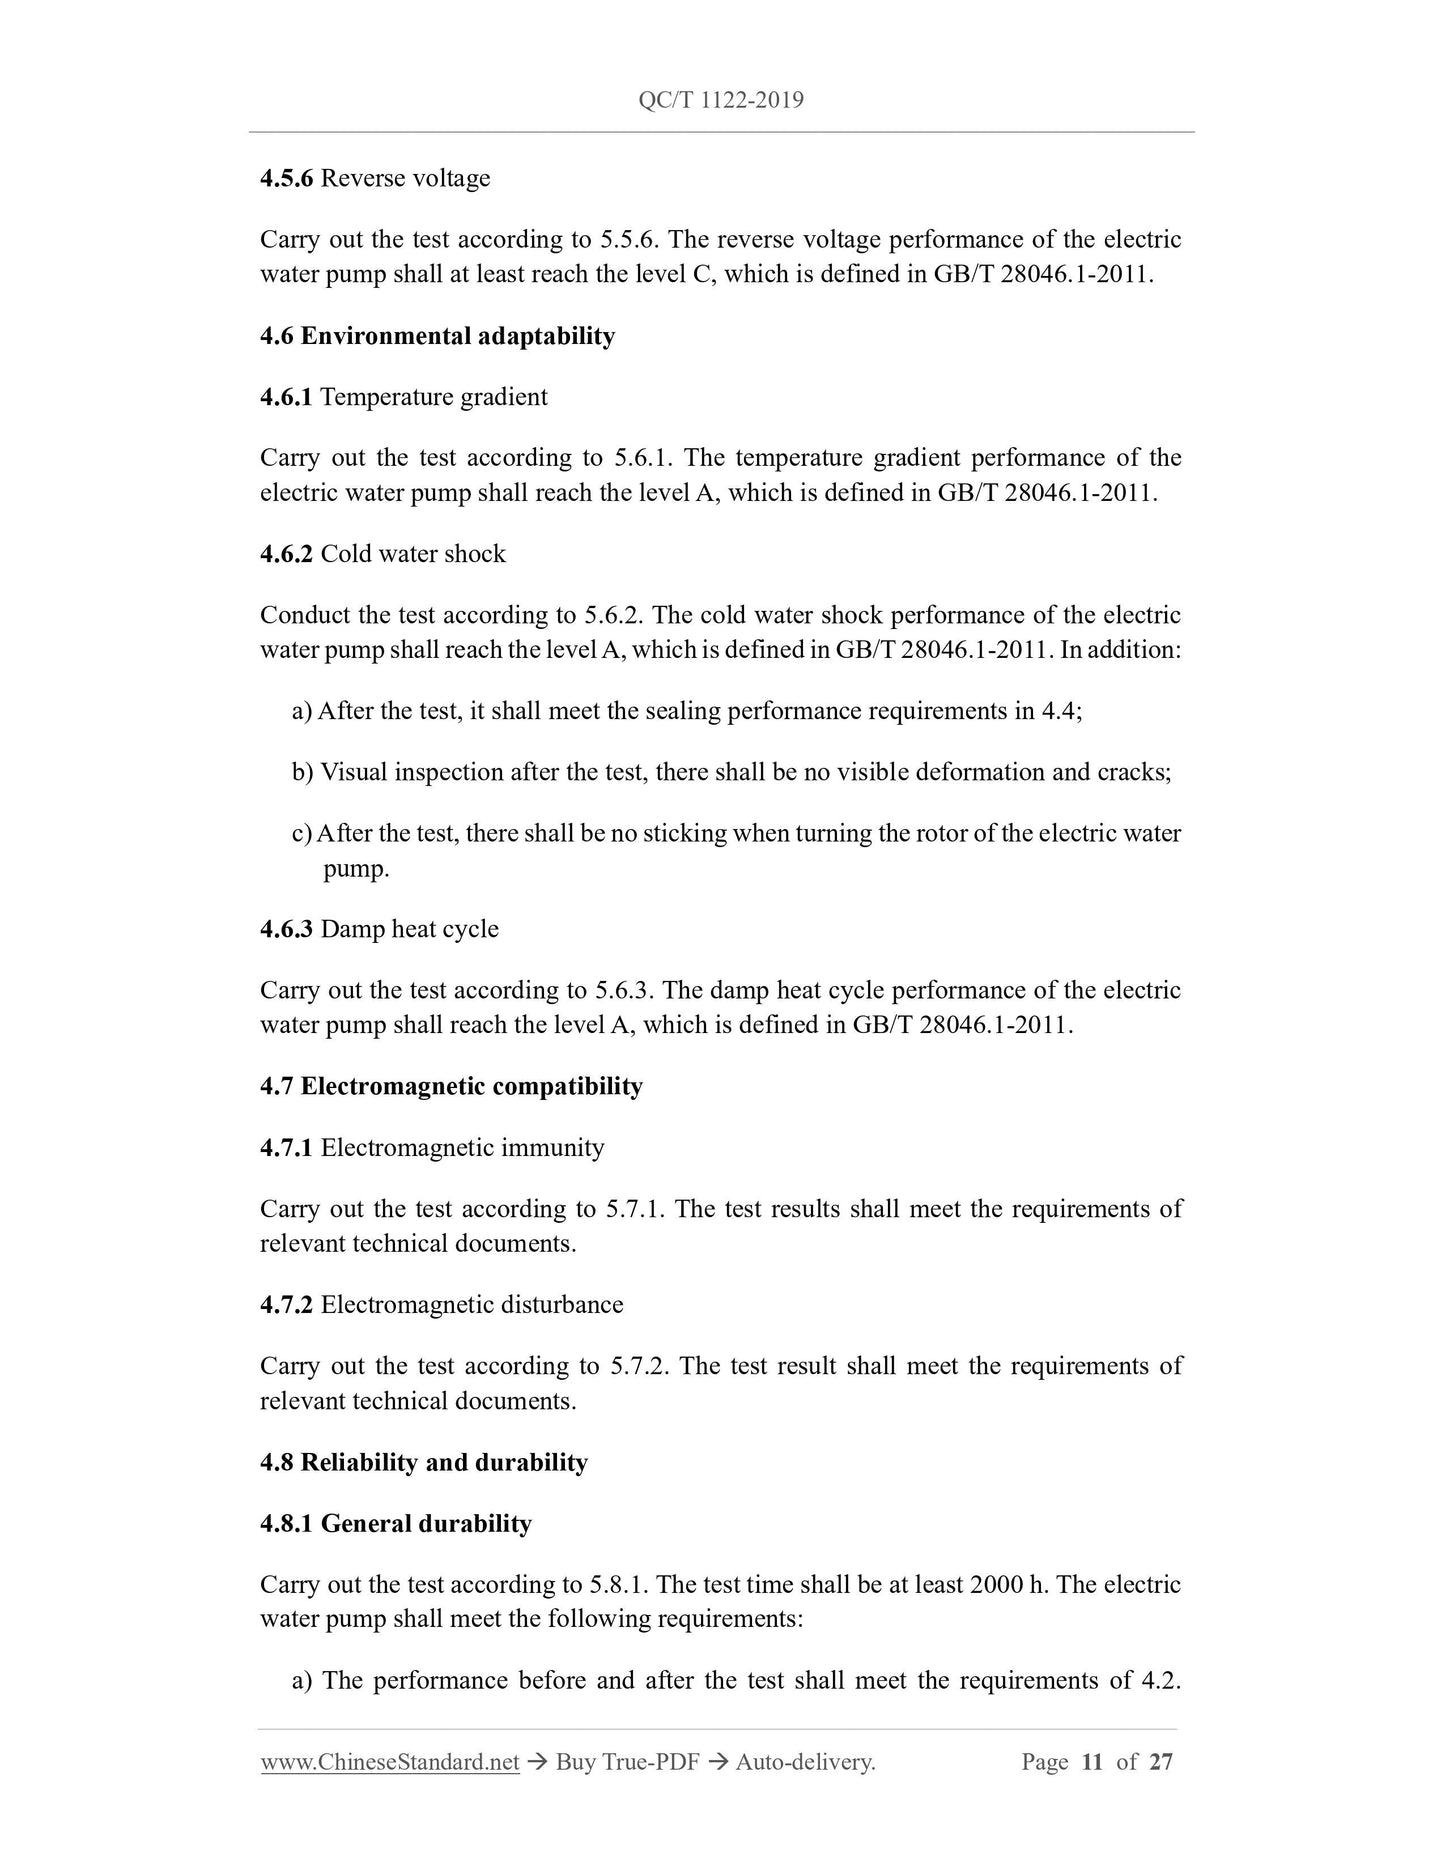 QC/T 1122-2019 Page 11